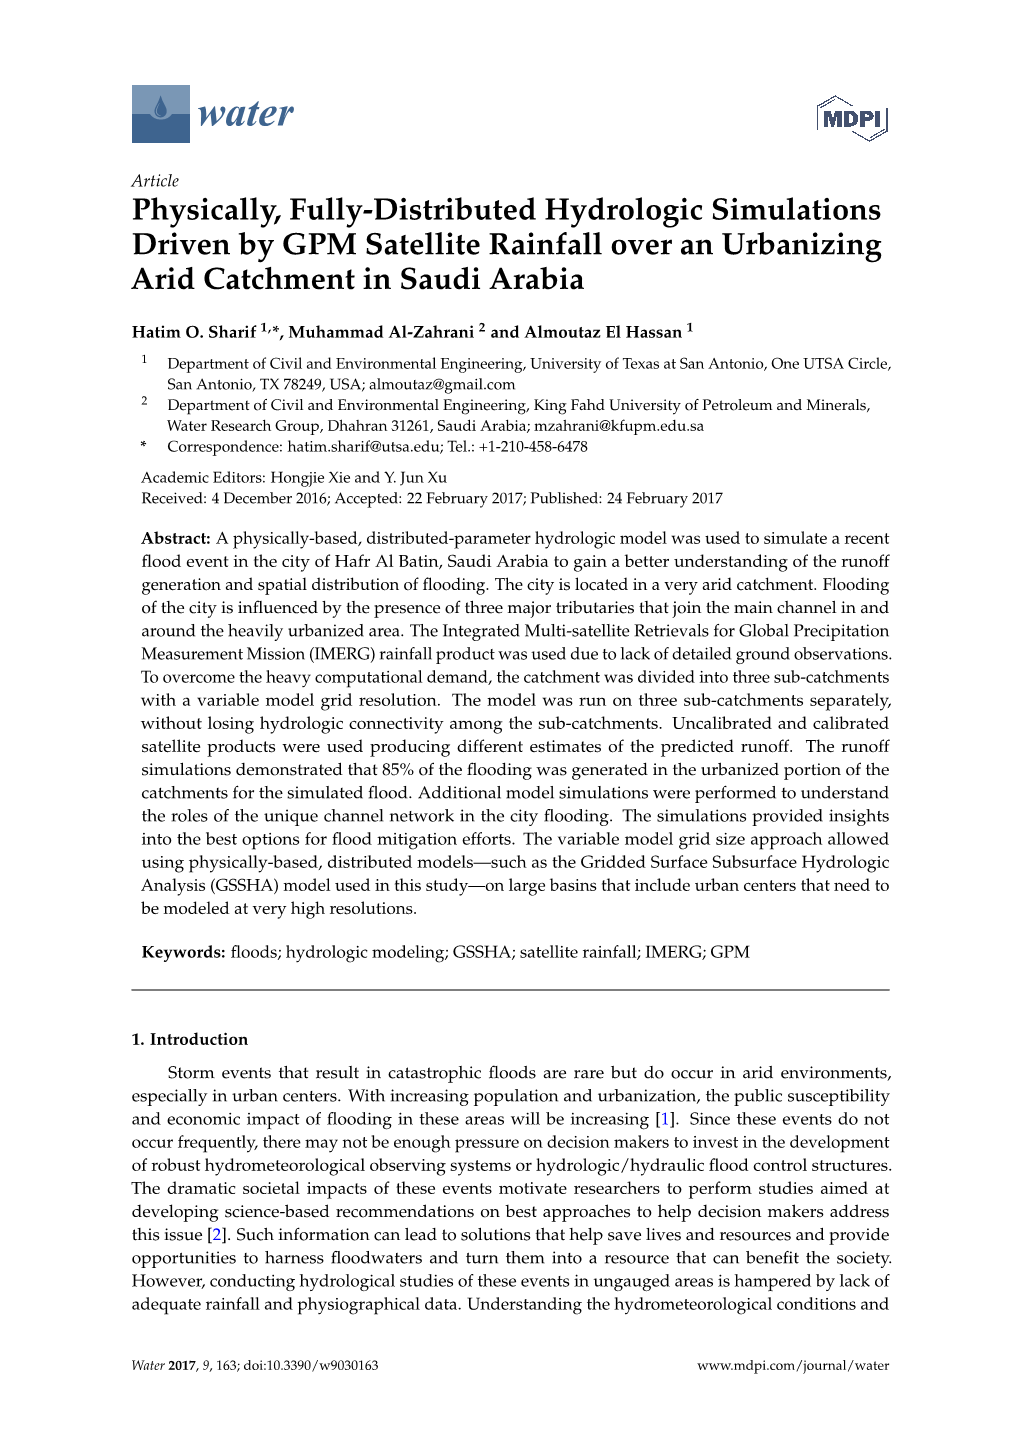 Physically, Fully-Distributed Hydrologic Simulations Driven by GPM Satellite Rainfall Over an Urbanizing Arid Catchment in Saudi Arabia